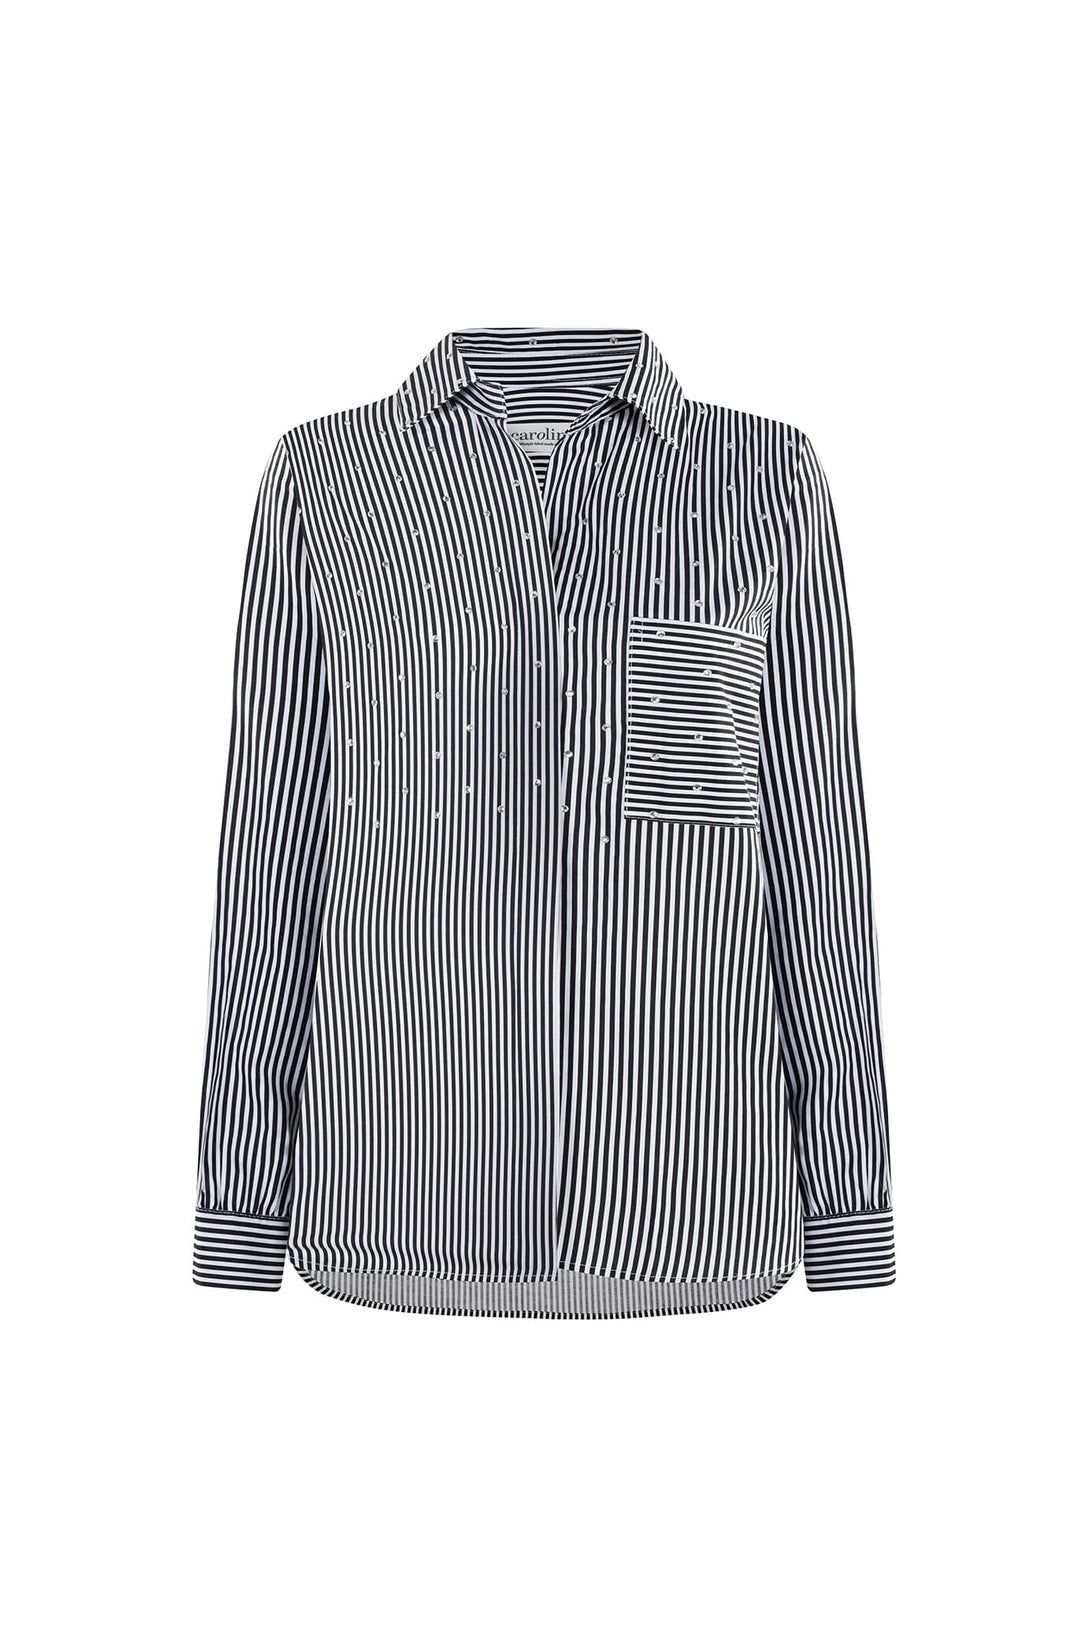 Renata Black and White Striped Collared Shirt Tops | Long Sleeve